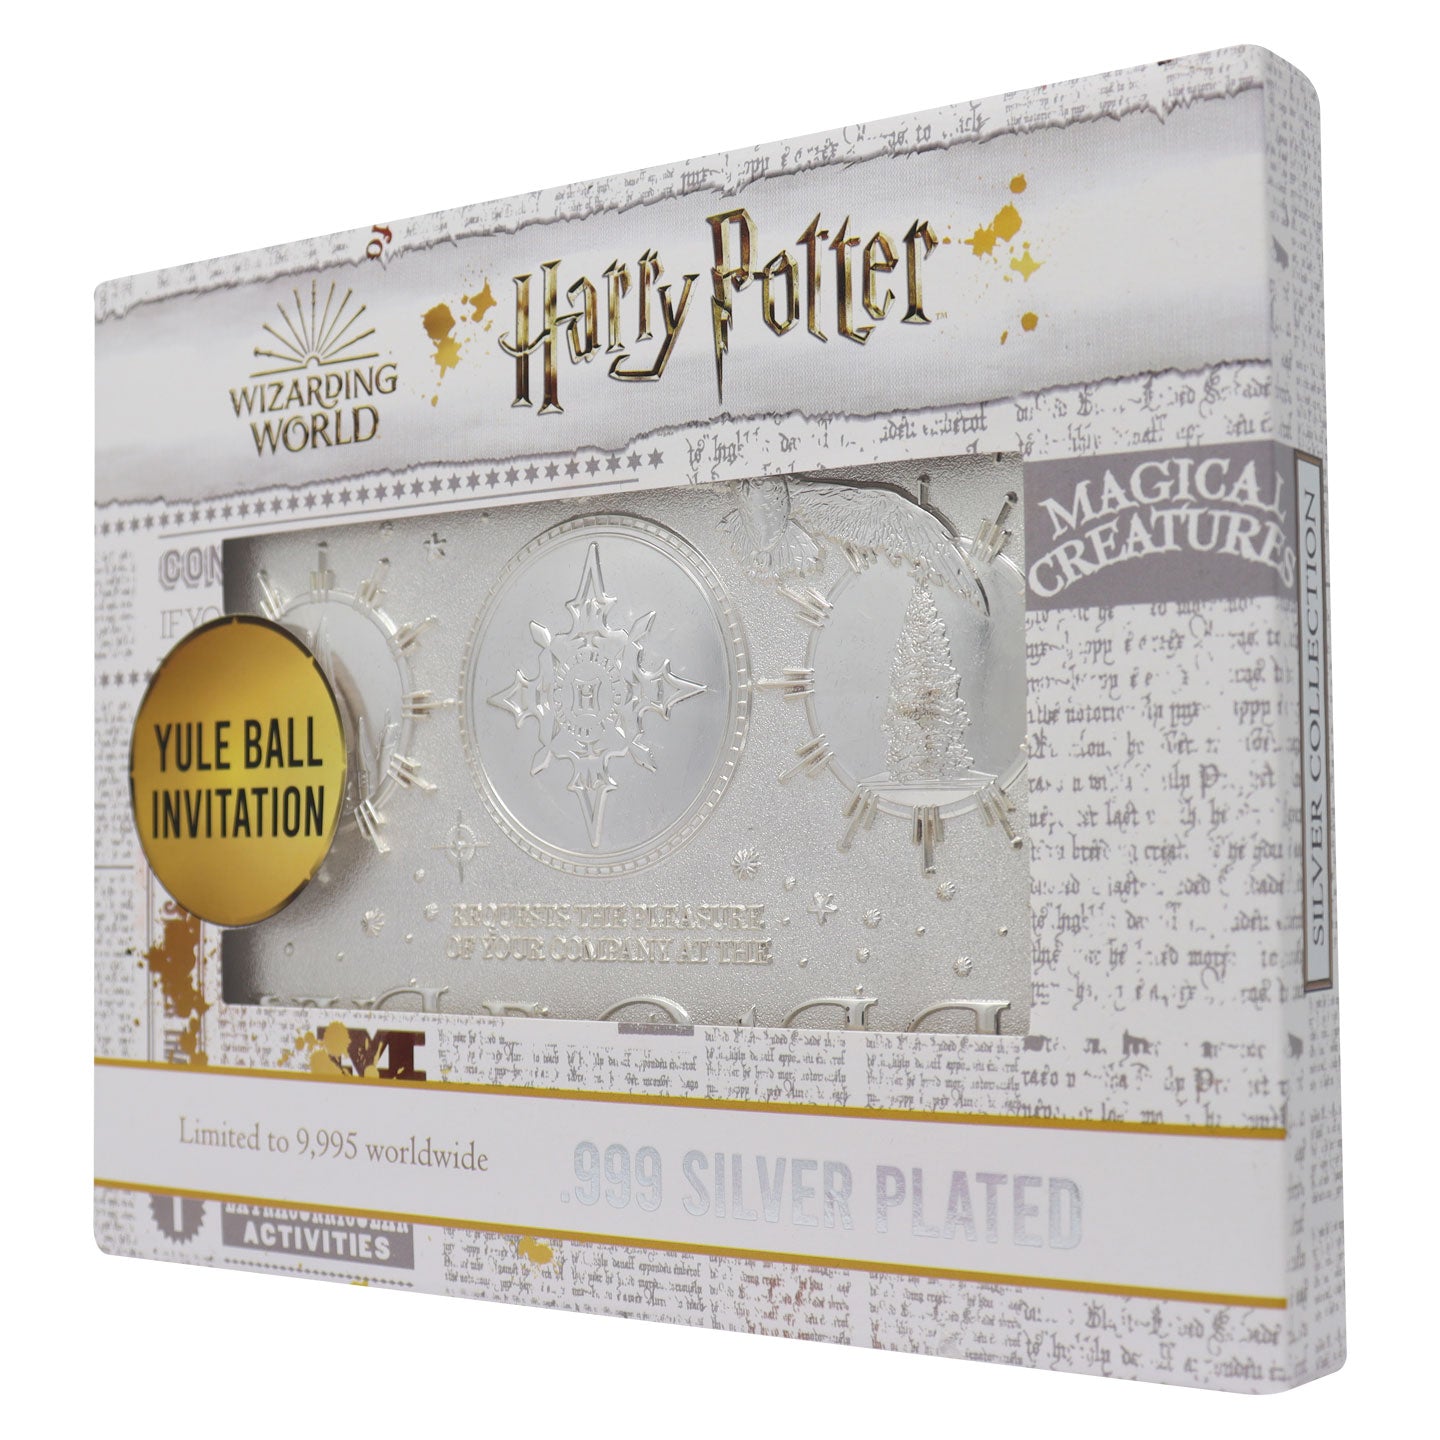 Harry Potter Limited Edition .999 Silver Plated Replica Yule Ball Ticket